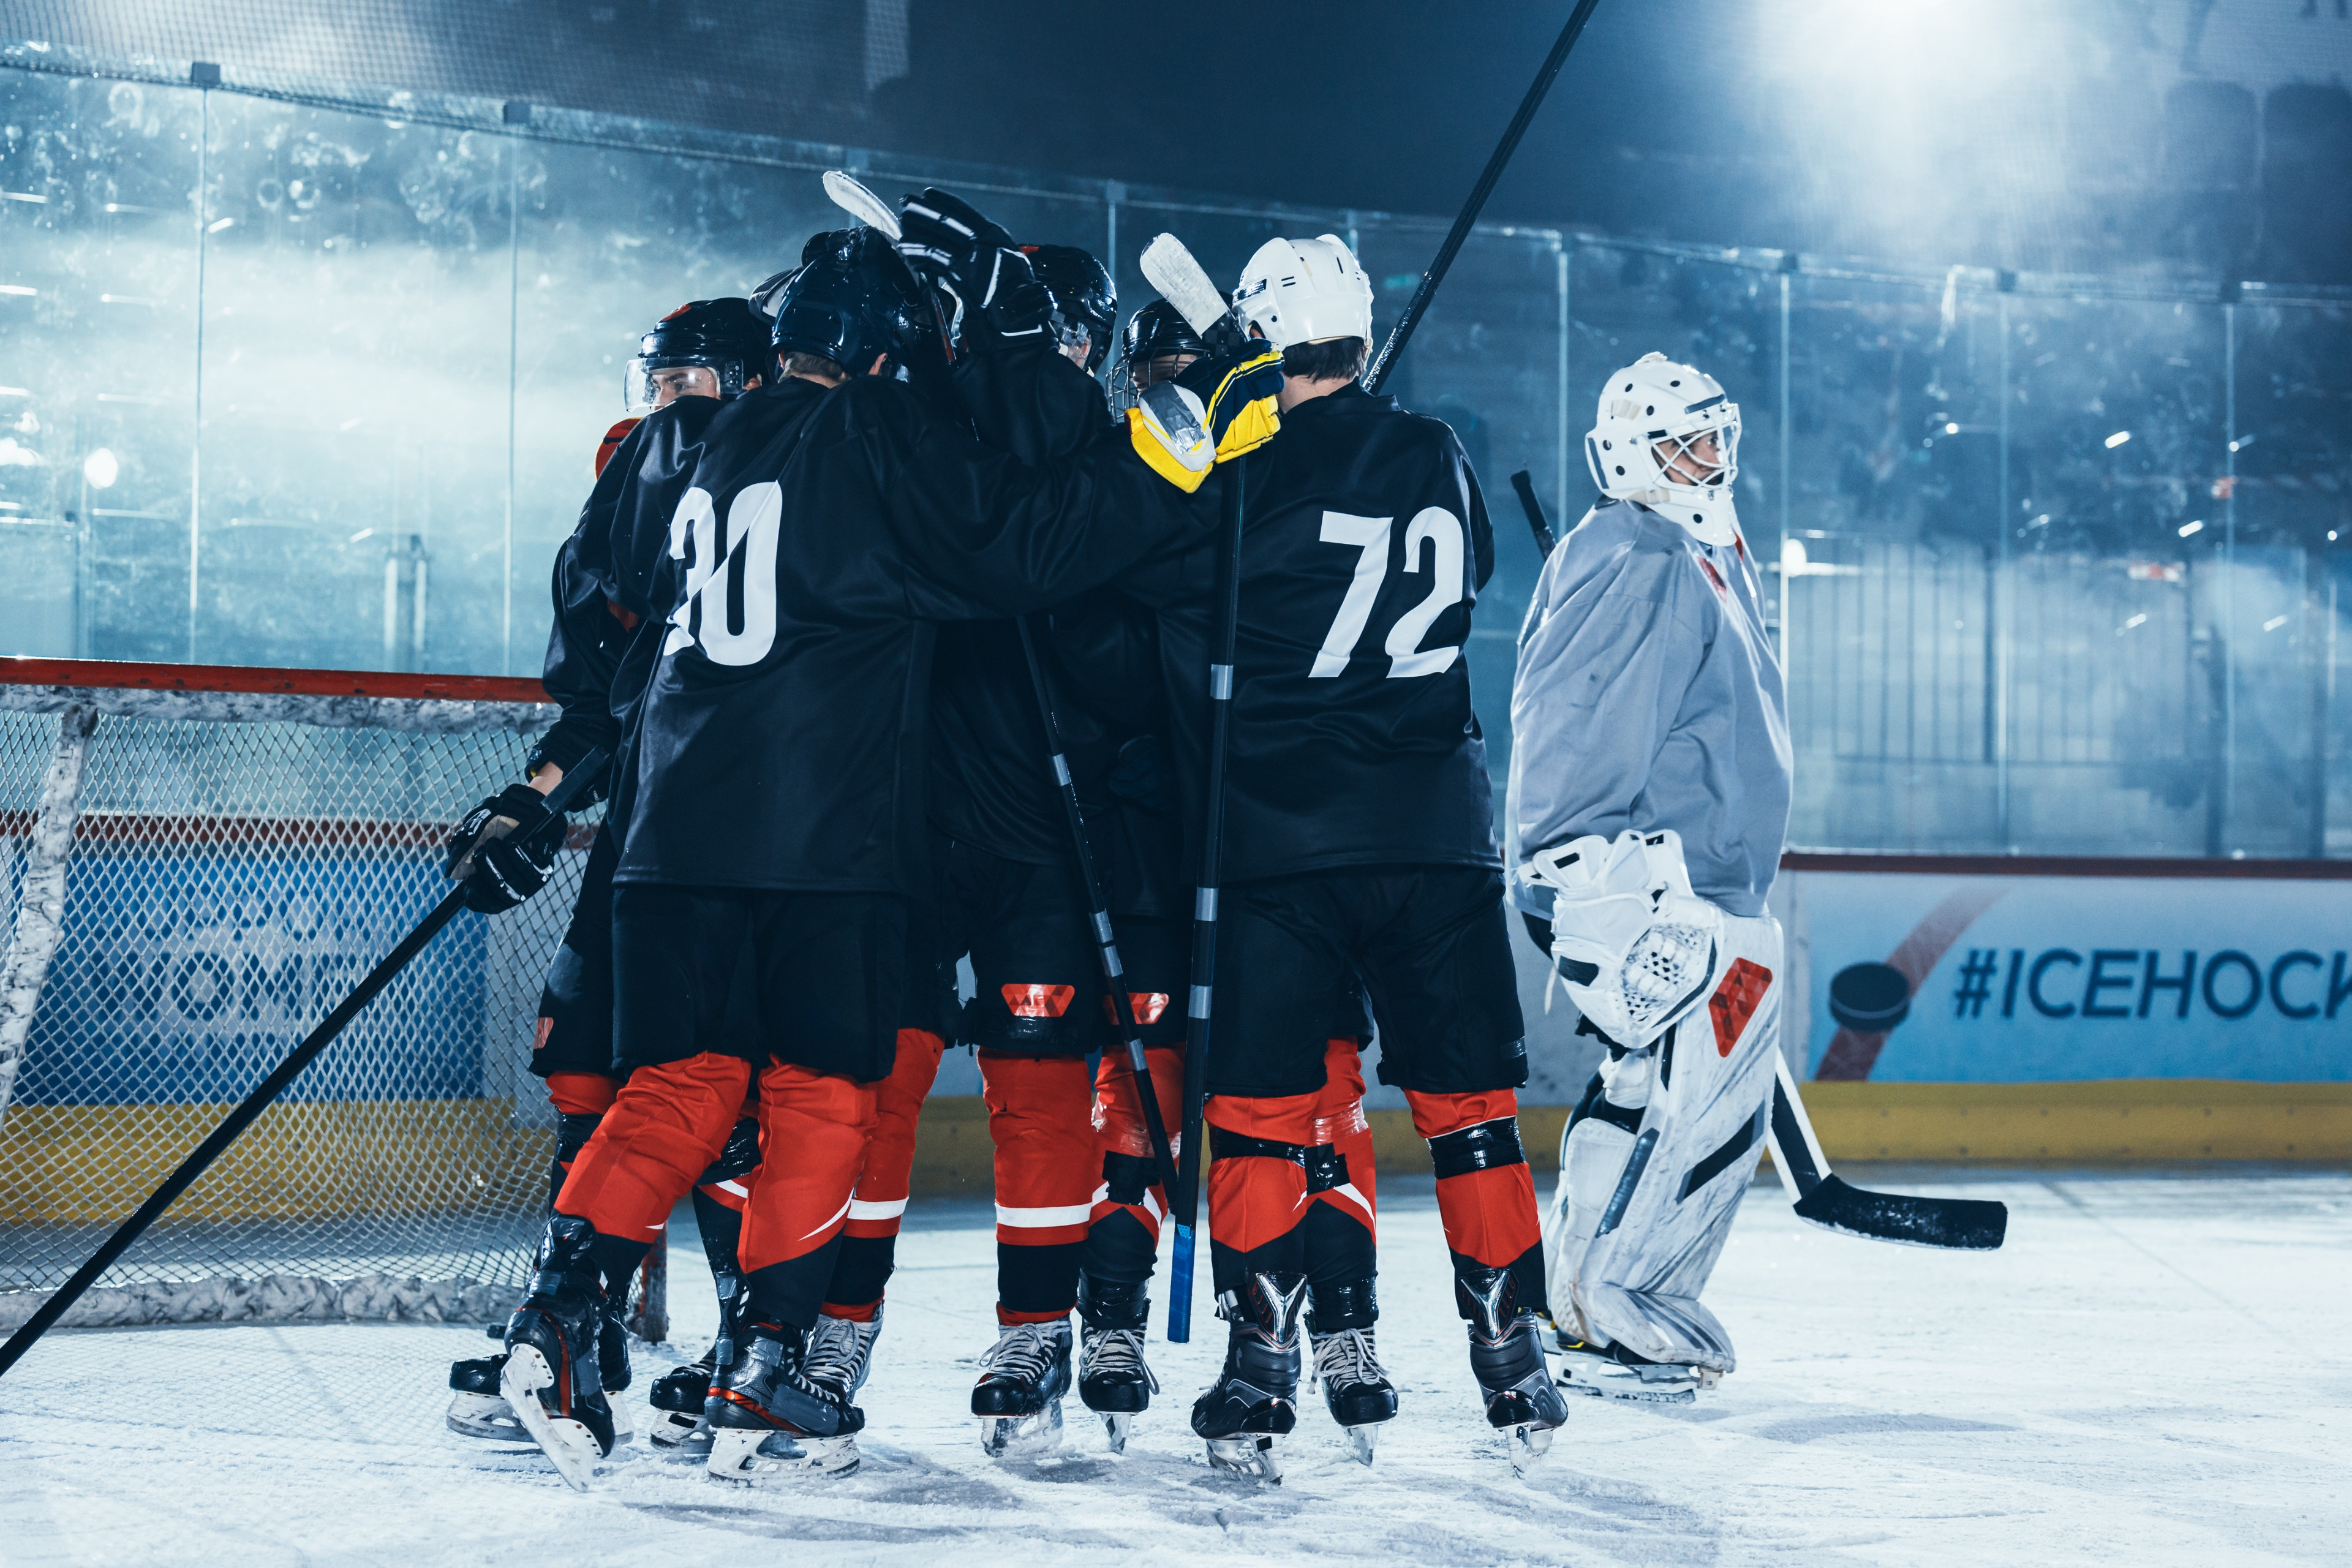 Environmentalism on ice: This Nordic hockey team plays for the